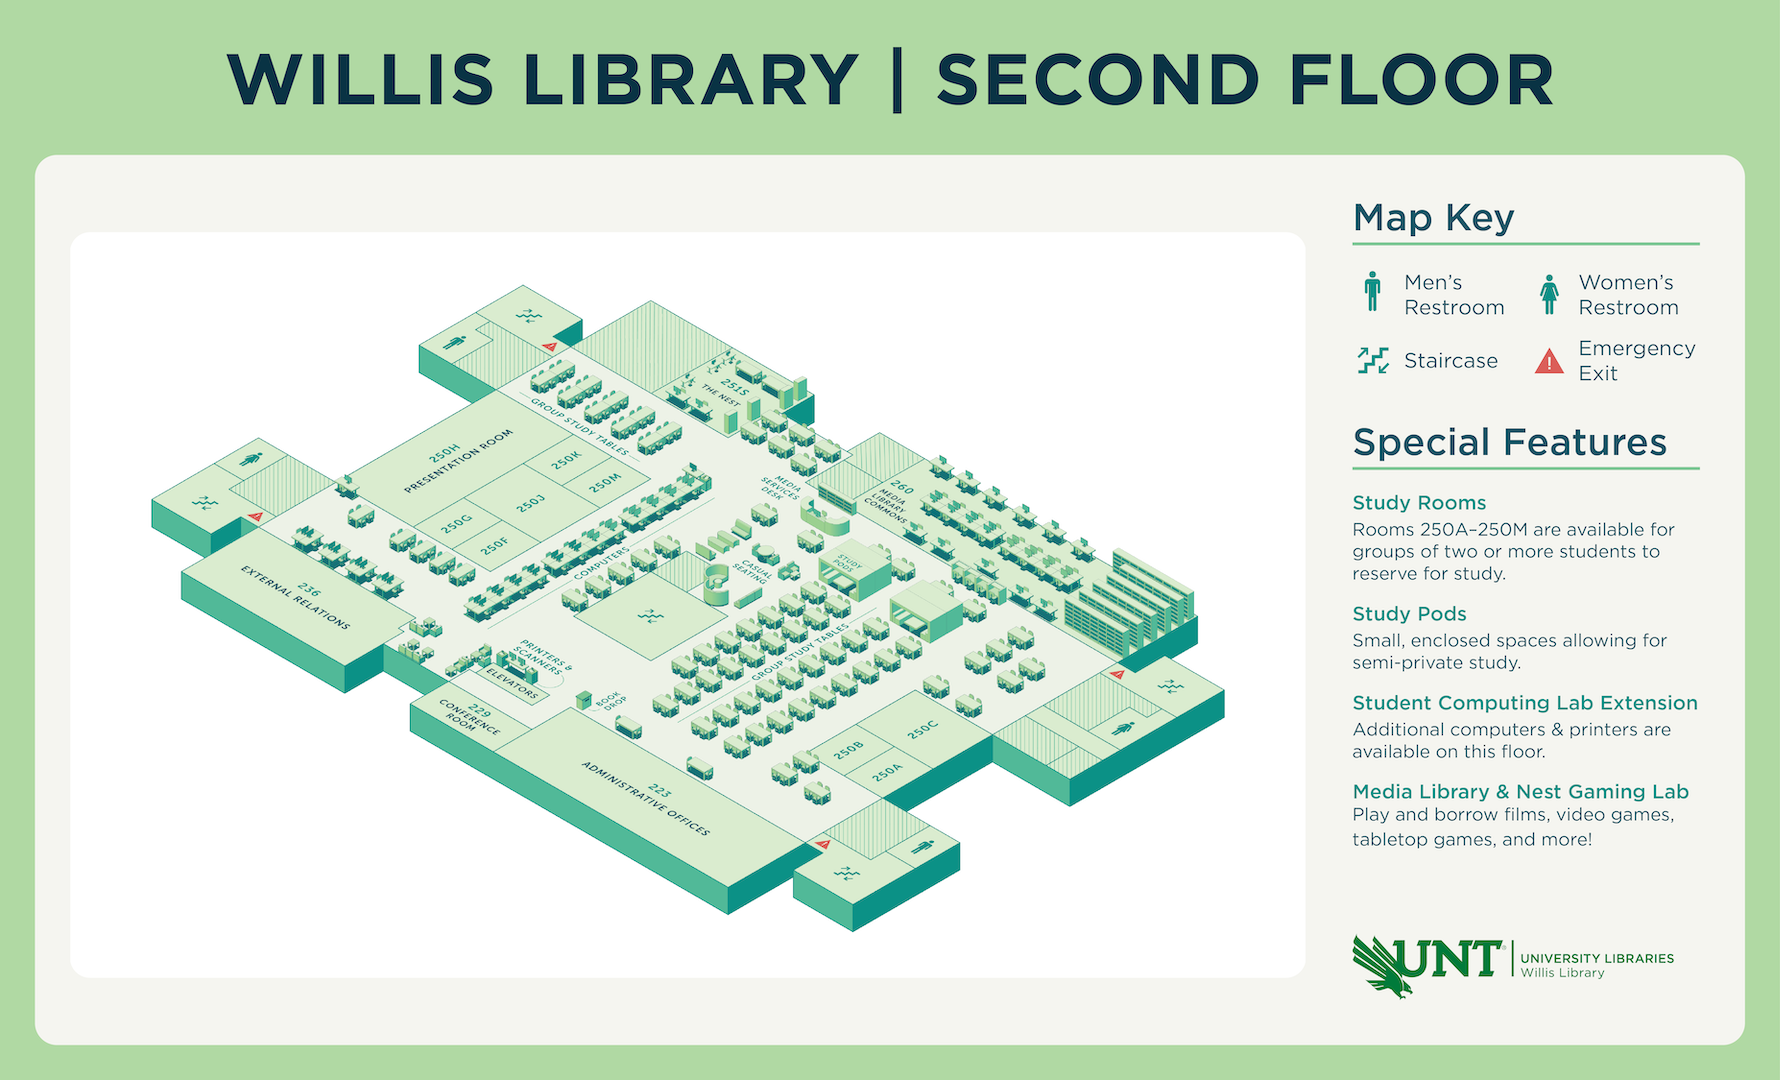 Second Floor Map of Willis Library